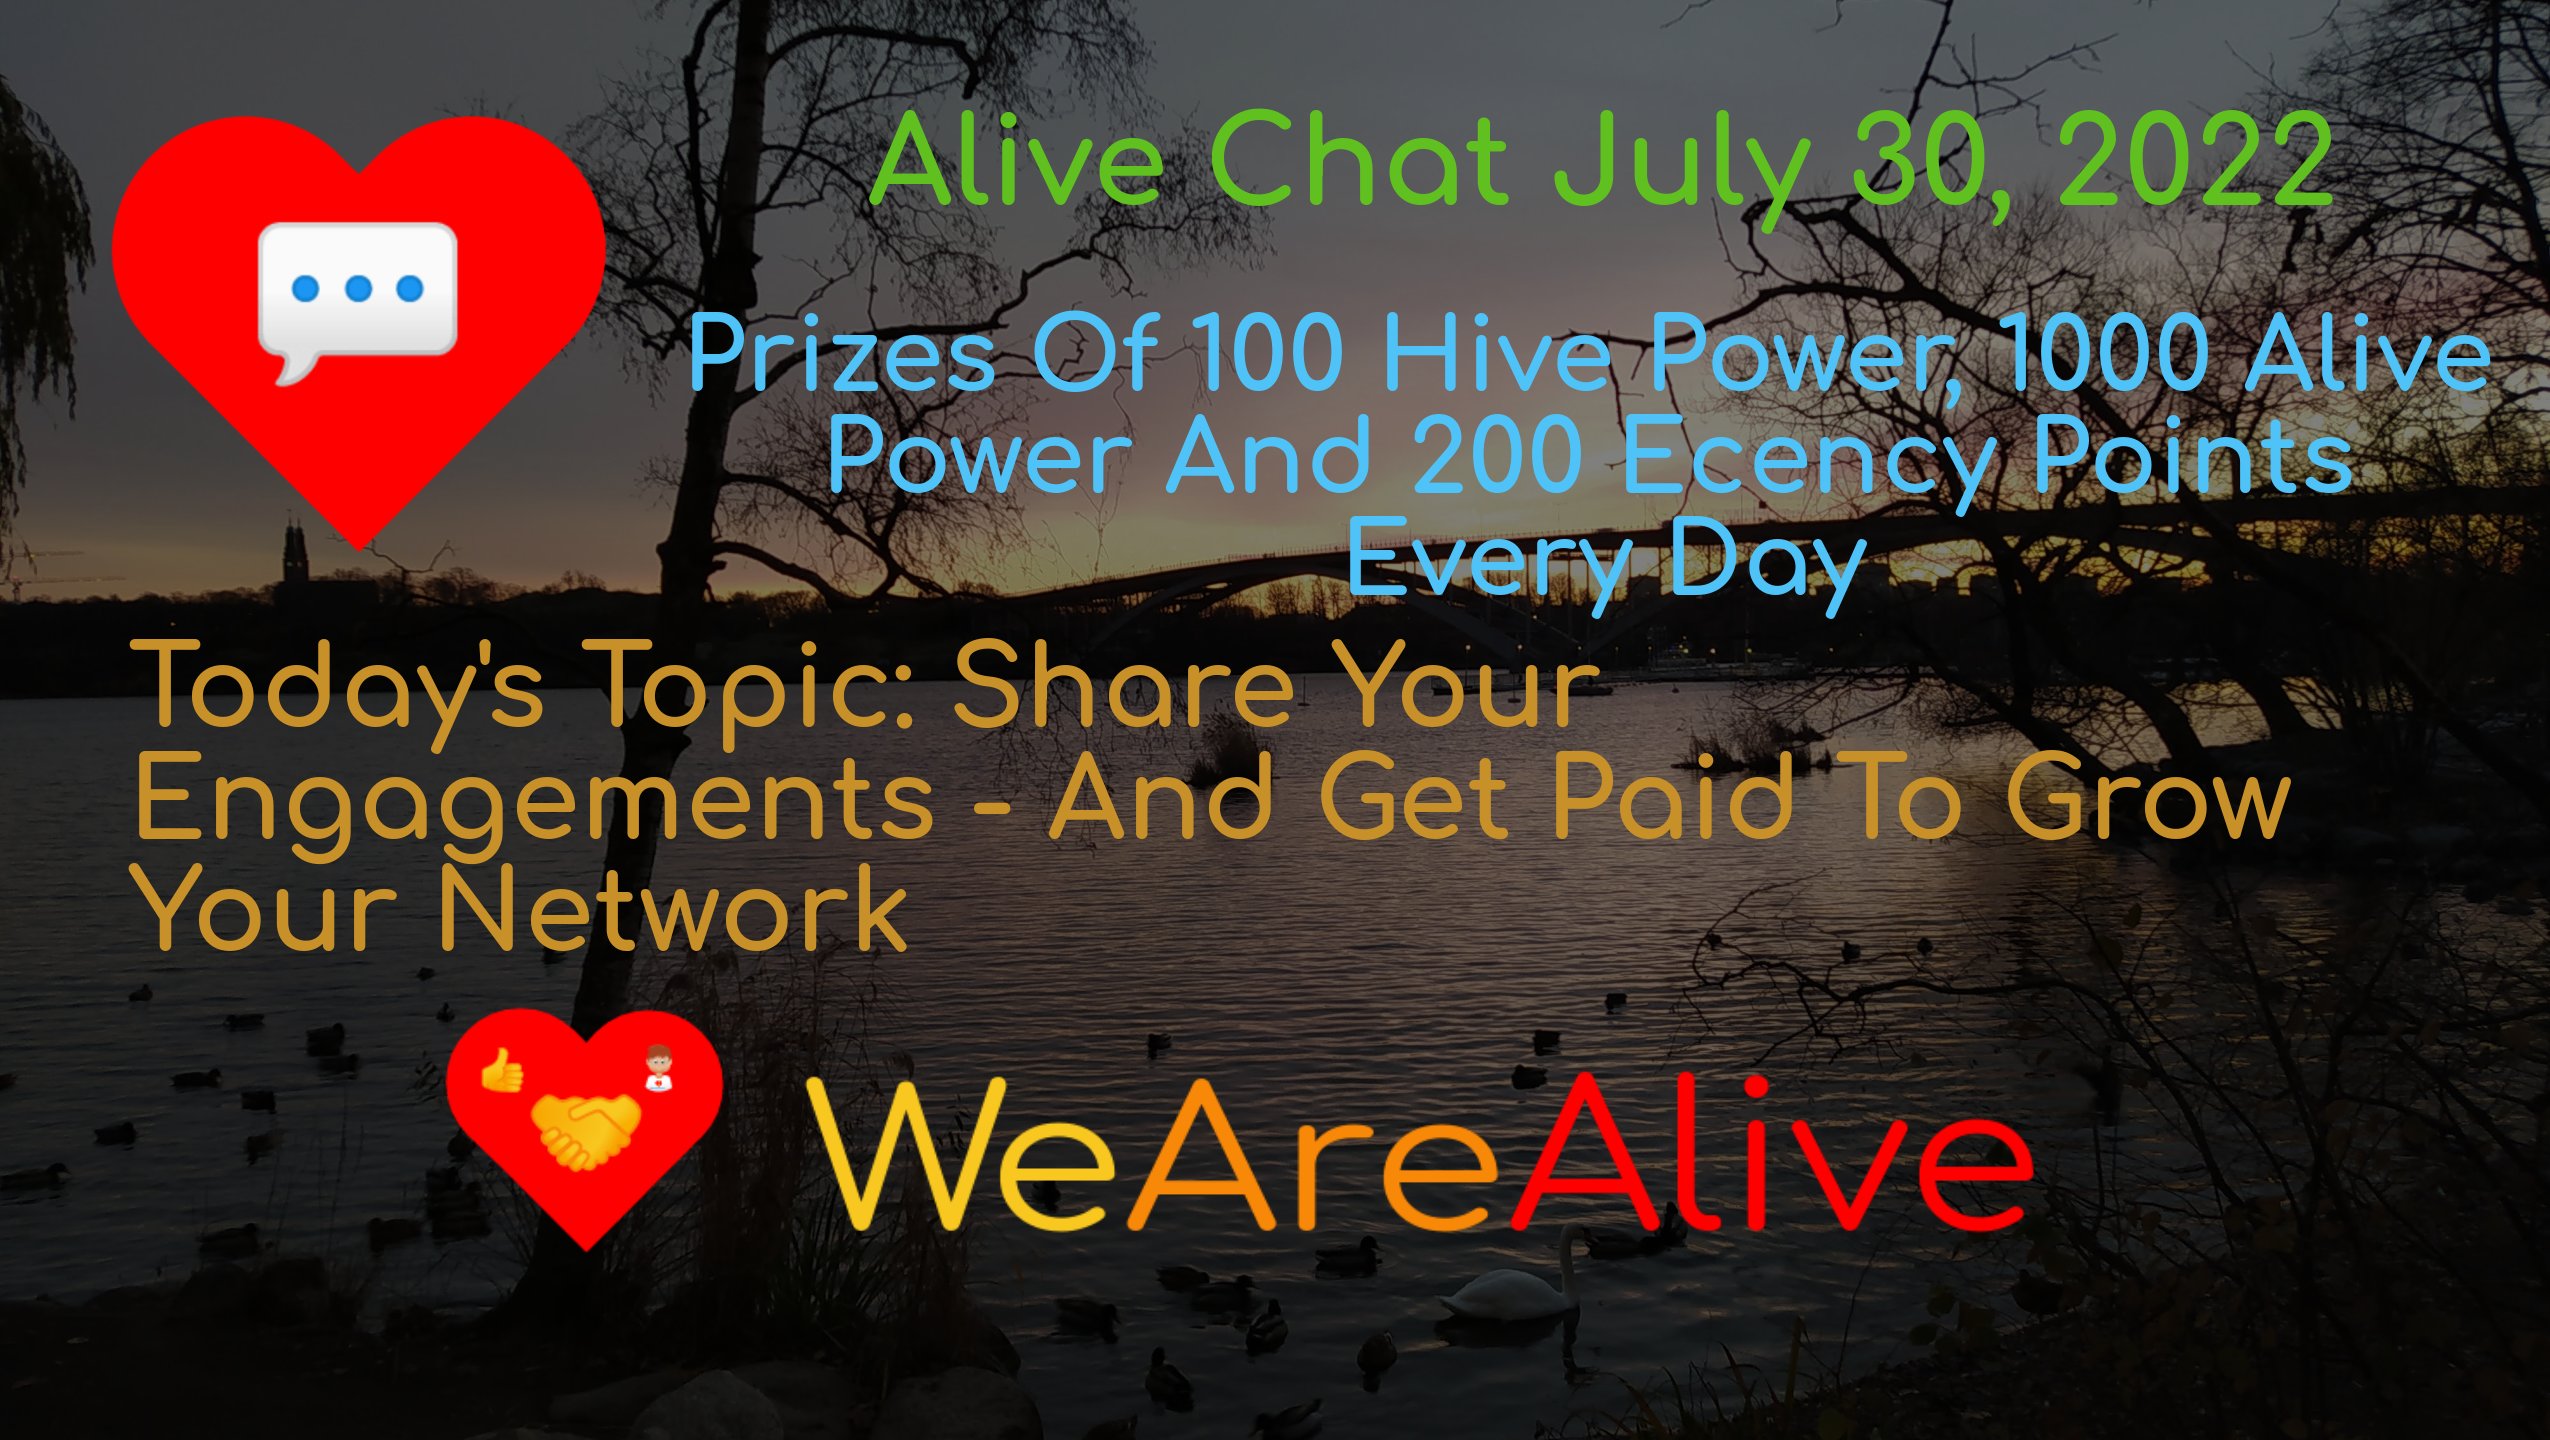 @alive.chat/alive-chat-july-30-2022-daily-prize-drawing-open-for-entries-todays-topic-share-your-engagements-and-get-paid-to-grow-your-net